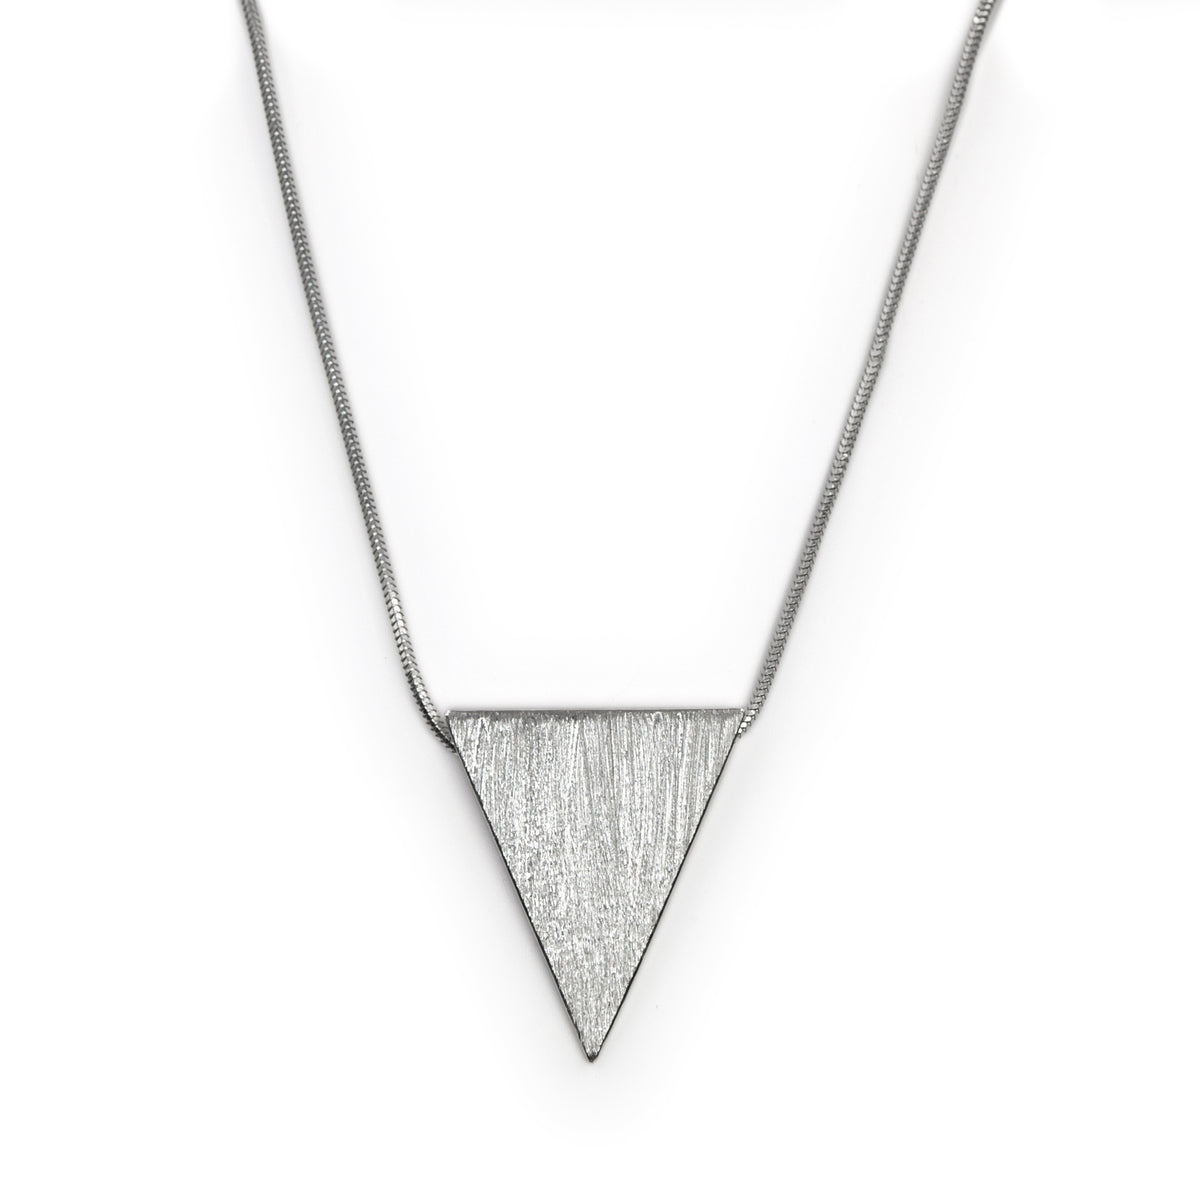 Sterling silver Stratos necklace by Rouaida.